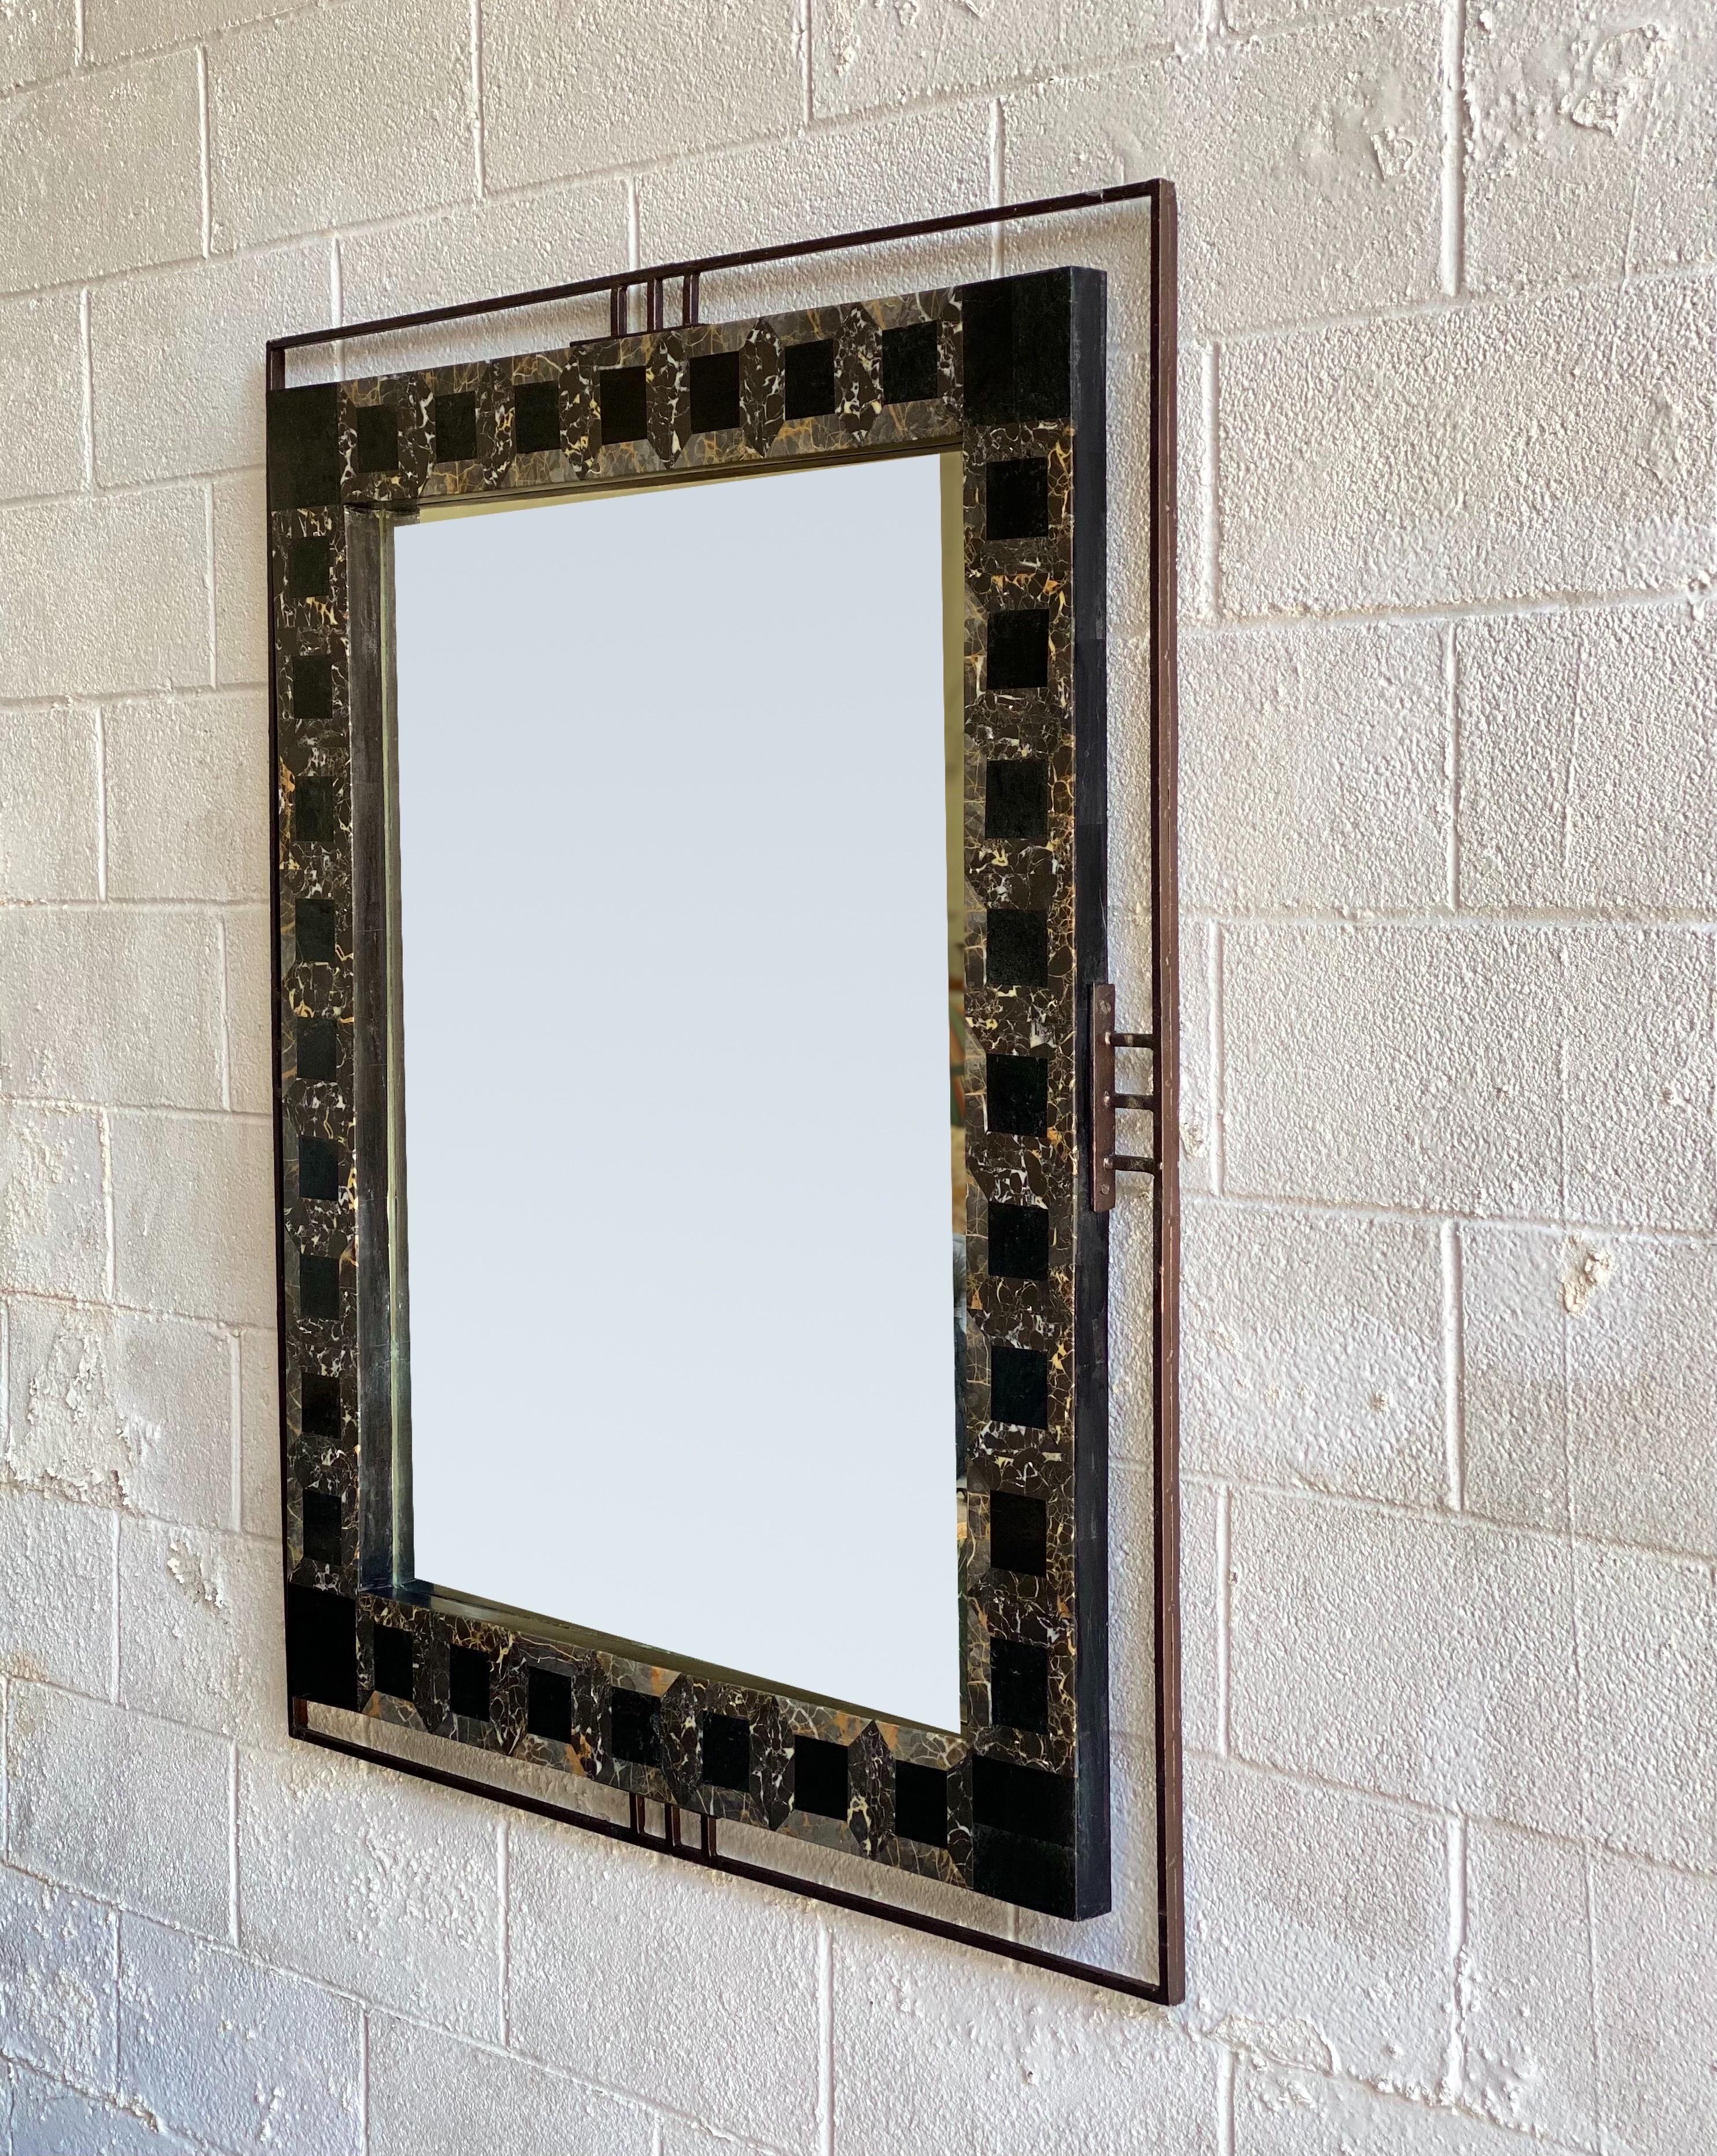 We are very pleased to offer a sculptural wall mirror, circa the 1970s. A rectangular tessellated marble highlights the material's organic texture, while a slim iron frame gives it an industrial character in sculptural style. Natural black and brown